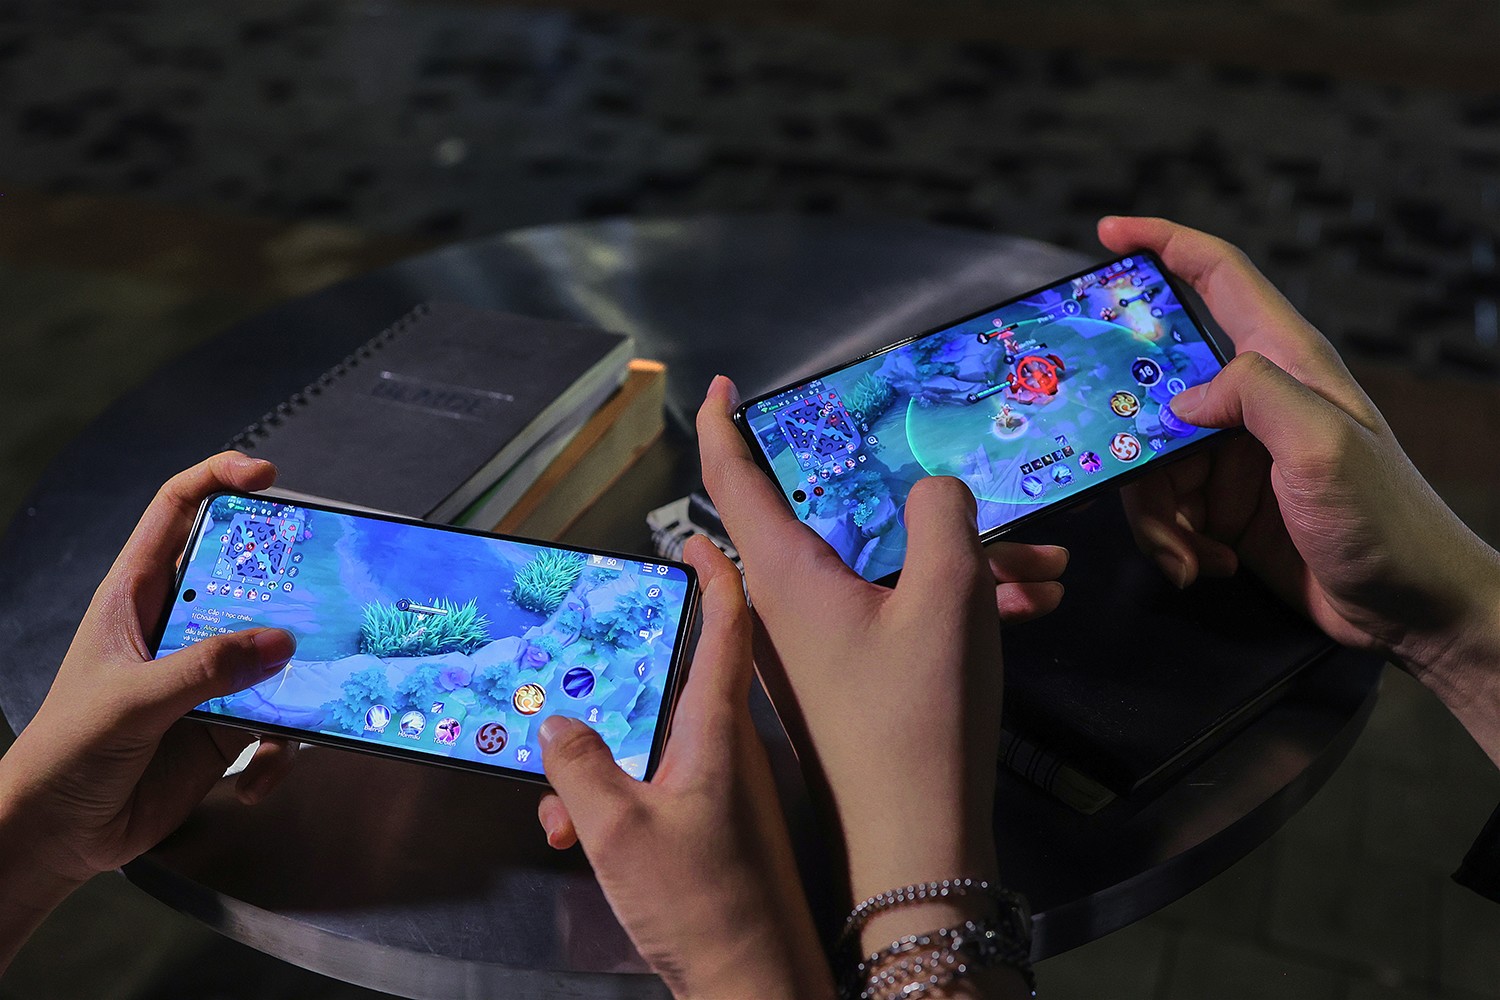 5000mAh battery and 70W super-fast charging help you play games freely without worrying about interruptions